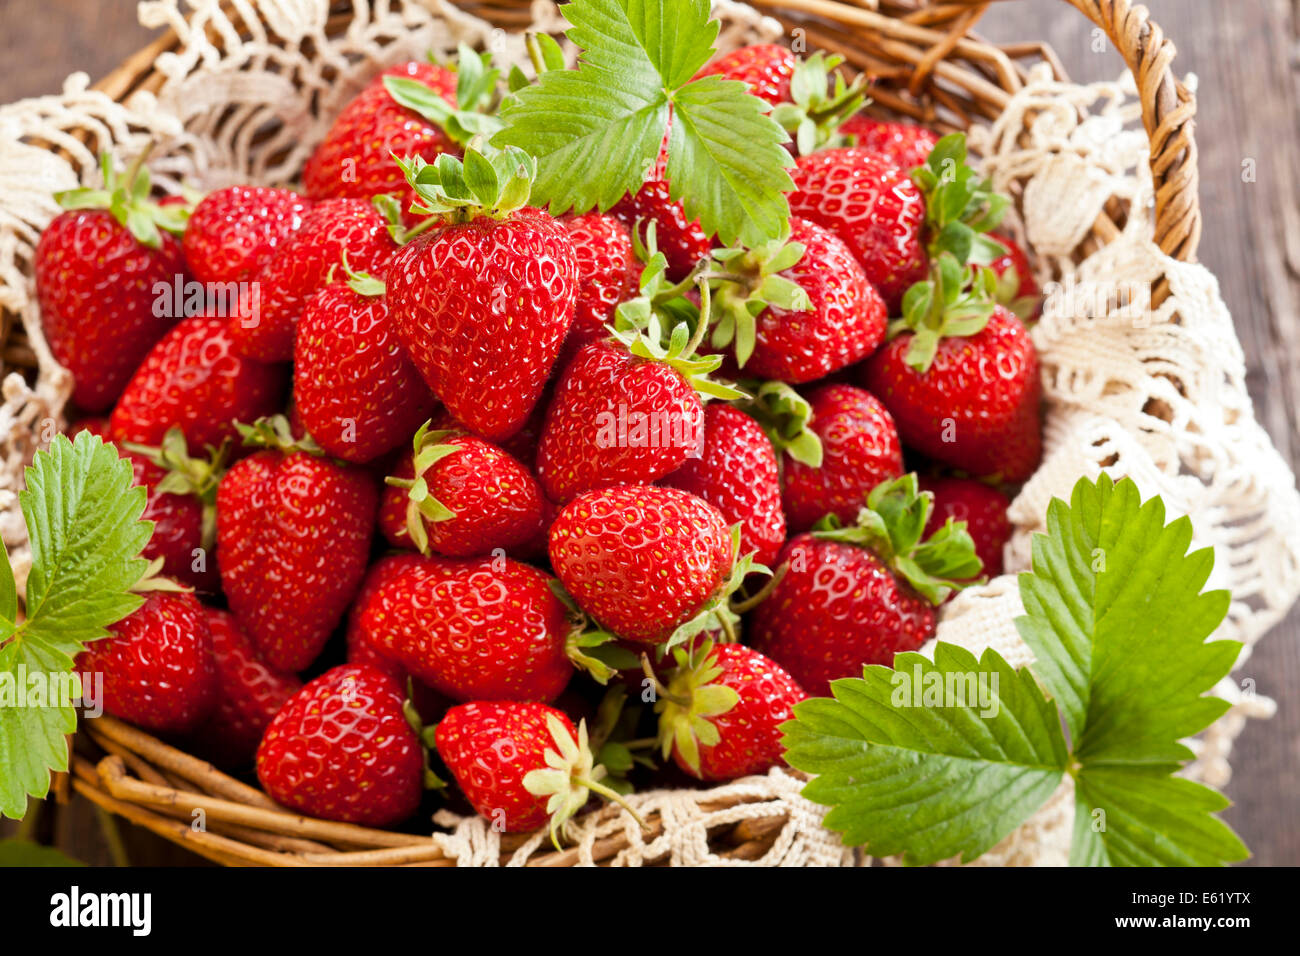 Strawberries in basket on rustic wooden background Stock Photo